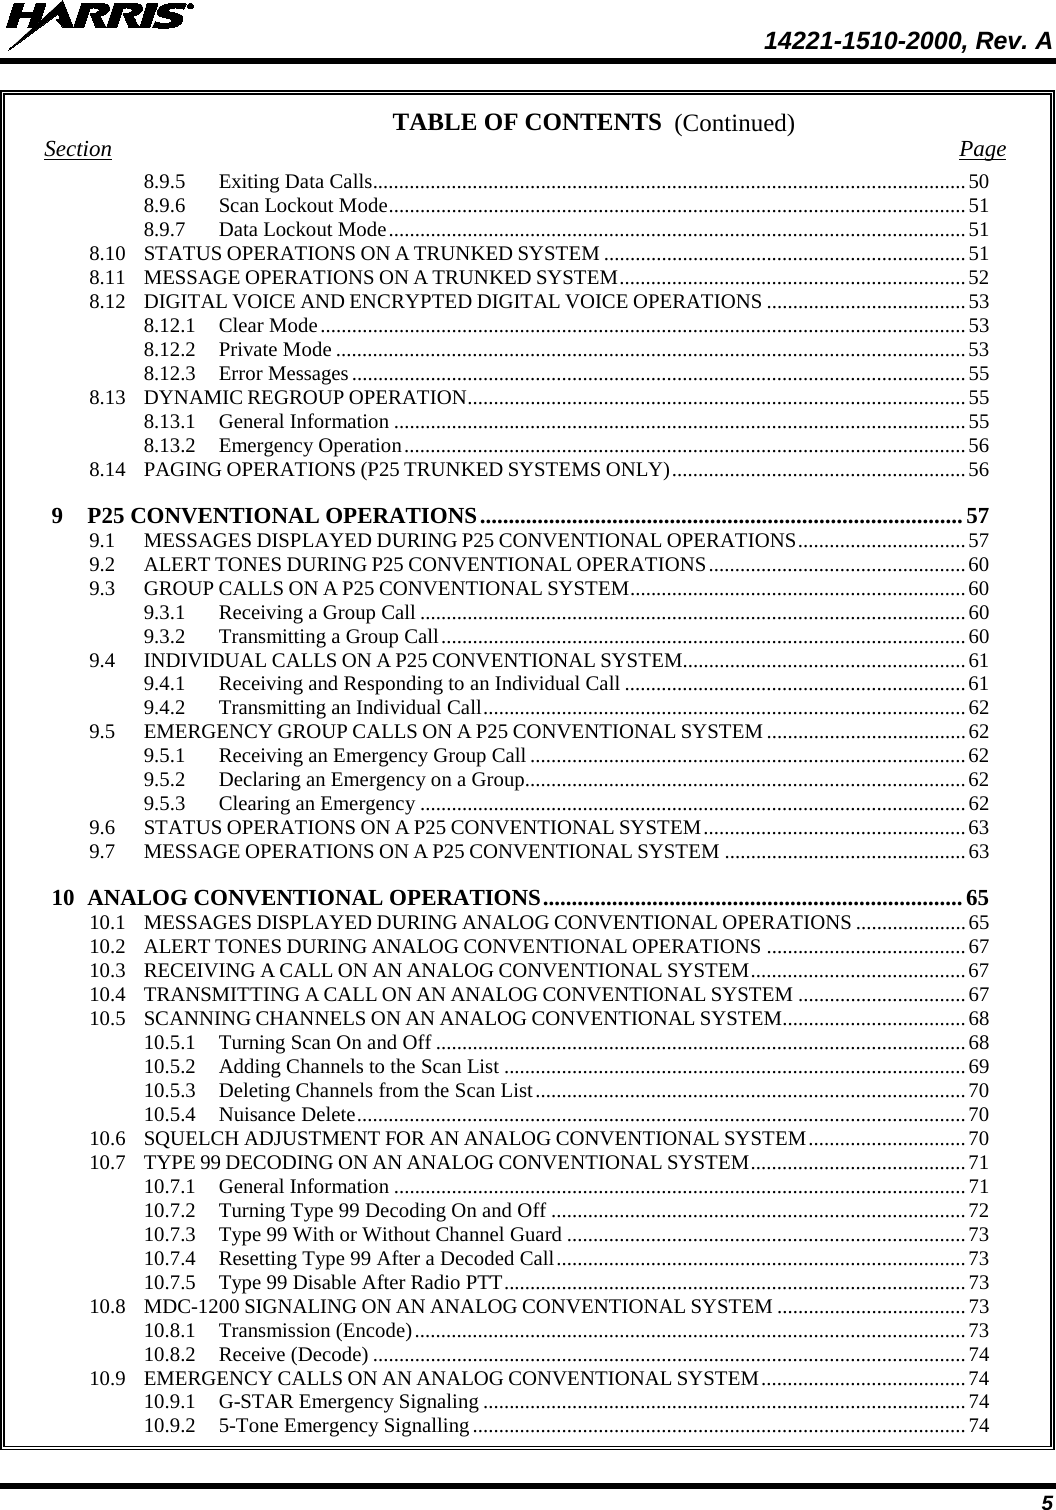  14221-1510-2000, Rev. A 5 (Continued) TABLE OF CONTENTS Section  Page 8.9.5 Exiting Data Calls................................................................................................................. 50 8.9.6 Scan Lockout Mode .............................................................................................................. 51 8.9.7 Data Lockout Mode .............................................................................................................. 51 8.10 STATUS OPERATIONS ON A TRUNKED SYSTEM ..................................................................... 51 8.11 MESSAGE OPERATIONS ON A TRUNKED SYSTEM .................................................................. 52 8.12 DIGITAL VOICE AND ENCRYPTED DIGITAL VOICE OPERATIONS ...................................... 53 8.12.1 Clear Mode ........................................................................................................................... 53 8.12.2 Private Mode ........................................................................................................................ 53 8.12.3 Error Messages ..................................................................................................................... 55 8.13 DYNAMIC REGROUP OPERATION ............................................................................................... 55 8.13.1 General Information ............................................................................................................. 55 8.13.2 Emergency Operation ........................................................................................................... 56 8.14 PAGING OPERATIONS (P25 TRUNKED SYSTEMS ONLY) ........................................................ 56 9 P25 CONVENTIONAL OPERATIONS .................................................................................... 57 9.1 MESSAGES DISPLAYED DURING P25 CONVENTIONAL OPERATIONS ................................ 57 9.2 ALERT TONES DURING P25 CONVENTIONAL OPERATIONS ................................................. 60 9.3 GROUP CALLS ON A P25 CONVENTIONAL SYSTEM ................................................................ 60 9.3.1 Receiving a Group Call ........................................................................................................ 60 9.3.2 Transmitting a Group Call .................................................................................................... 60 9.4 INDIVIDUAL CALLS ON A P25 CONVENTIONAL SYSTEM...................................................... 61 9.4.1 Receiving and Responding to an Individual Call ................................................................. 61 9.4.2 Transmitting an Individual Call ............................................................................................ 62 9.5 EMERGENCY GROUP CALLS ON A P25 CONVENTIONAL SYSTEM ...................................... 62 9.5.1 Receiving an Emergency Group Call ................................................................................... 62 9.5.2 Declaring an Emergency on a Group .................................................................................... 62 9.5.3 Clearing an Emergency ........................................................................................................ 62 9.6 STATUS OPERATIONS ON A P25 CONVENTIONAL SYSTEM .................................................. 63 9.7 MESSAGE OPERATIONS ON A P25 CONVENTIONAL SYSTEM .............................................. 63 10 ANALOG CONVENTIONAL OPERATIONS ......................................................................... 65 10.1 MESSAGES DISPLAYED DURING ANALOG CONVENTIONAL OPERATIONS ..................... 65 10.2 ALERT TONES DURING ANALOG CONVENTIONAL OPERATIONS ...................................... 67 10.3 RECEIVING A CALL ON AN ANALOG CONVENTIONAL SYSTEM ......................................... 67 10.4 TRANSMITTING A CALL ON AN ANALOG CONVENTIONAL SYSTEM ................................ 67 10.5 SCANNING CHANNELS ON AN ANALOG CONVENTIONAL SYSTEM................................... 68 10.5.1 Turning Scan On and Off ..................................................................................................... 68 10.5.2 Adding Channels to the Scan List ........................................................................................ 69 10.5.3 Deleting Channels from the Scan List .................................................................................. 70 10.5.4 Nuisance Delete .................................................................................................................... 70 10.6 SQUELCH ADJUSTMENT FOR AN ANALOG CONVENTIONAL SYSTEM .............................. 70 10.7 TYPE 99 DECODING ON AN ANALOG CONVENTIONAL SYSTEM ......................................... 71 10.7.1 General Information ............................................................................................................. 71 10.7.2 Turning Type 99 Decoding On and Off ............................................................................... 72 10.7.3 Type 99 With or Without Channel Guard ............................................................................ 73 10.7.4 Resetting Type 99 After a Decoded Call .............................................................................. 73 10.7.5 Type 99 Disable After Radio PTT ........................................................................................ 73 10.8 MDC-1200 SIGNALING ON AN ANALOG CONVENTIONAL SYSTEM .................................... 73 10.8.1 Transmission (Encode) ......................................................................................................... 73 10.8.2 Receive (Decode) ................................................................................................................. 74 10.9 EMERGENCY CALLS ON AN ANALOG CONVENTIONAL SYSTEM ....................................... 74 10.9.1 G-STAR Emergency Signaling ............................................................................................ 74 10.9.2 5-Tone Emergency Signalling .............................................................................................. 74 